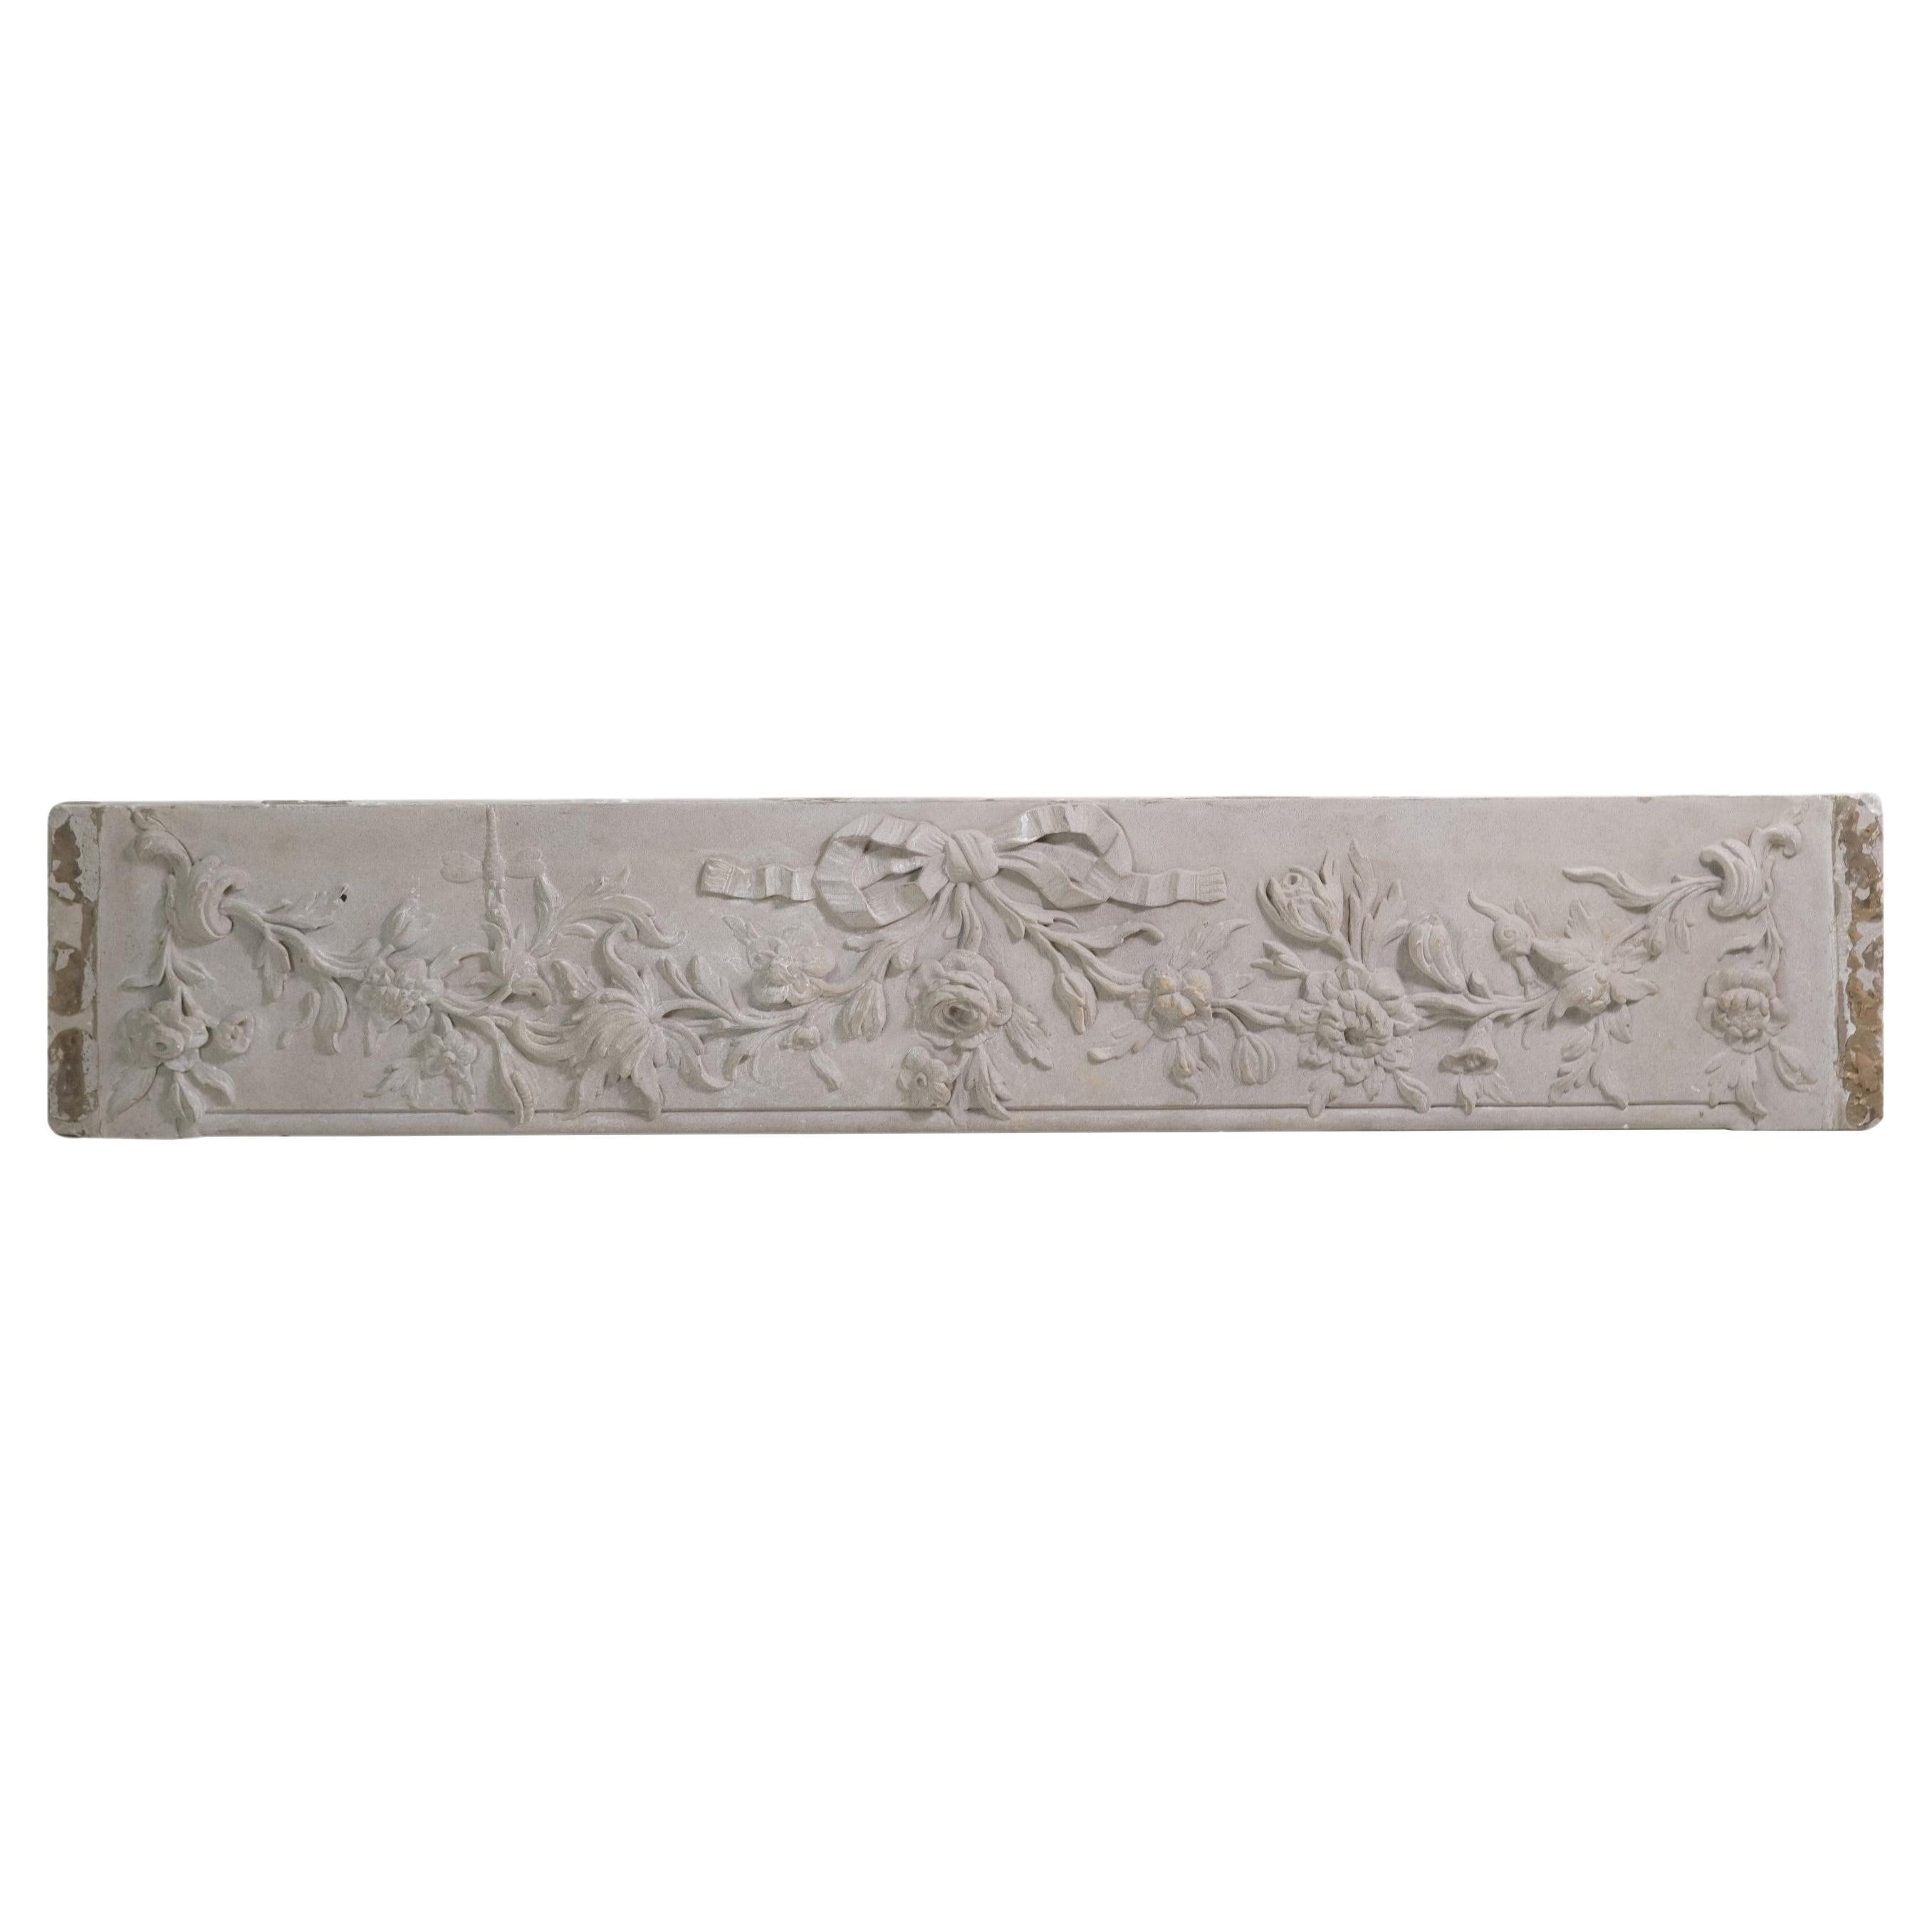 Hand Carved Building Stone Frieze Ribbon & Floral Swags